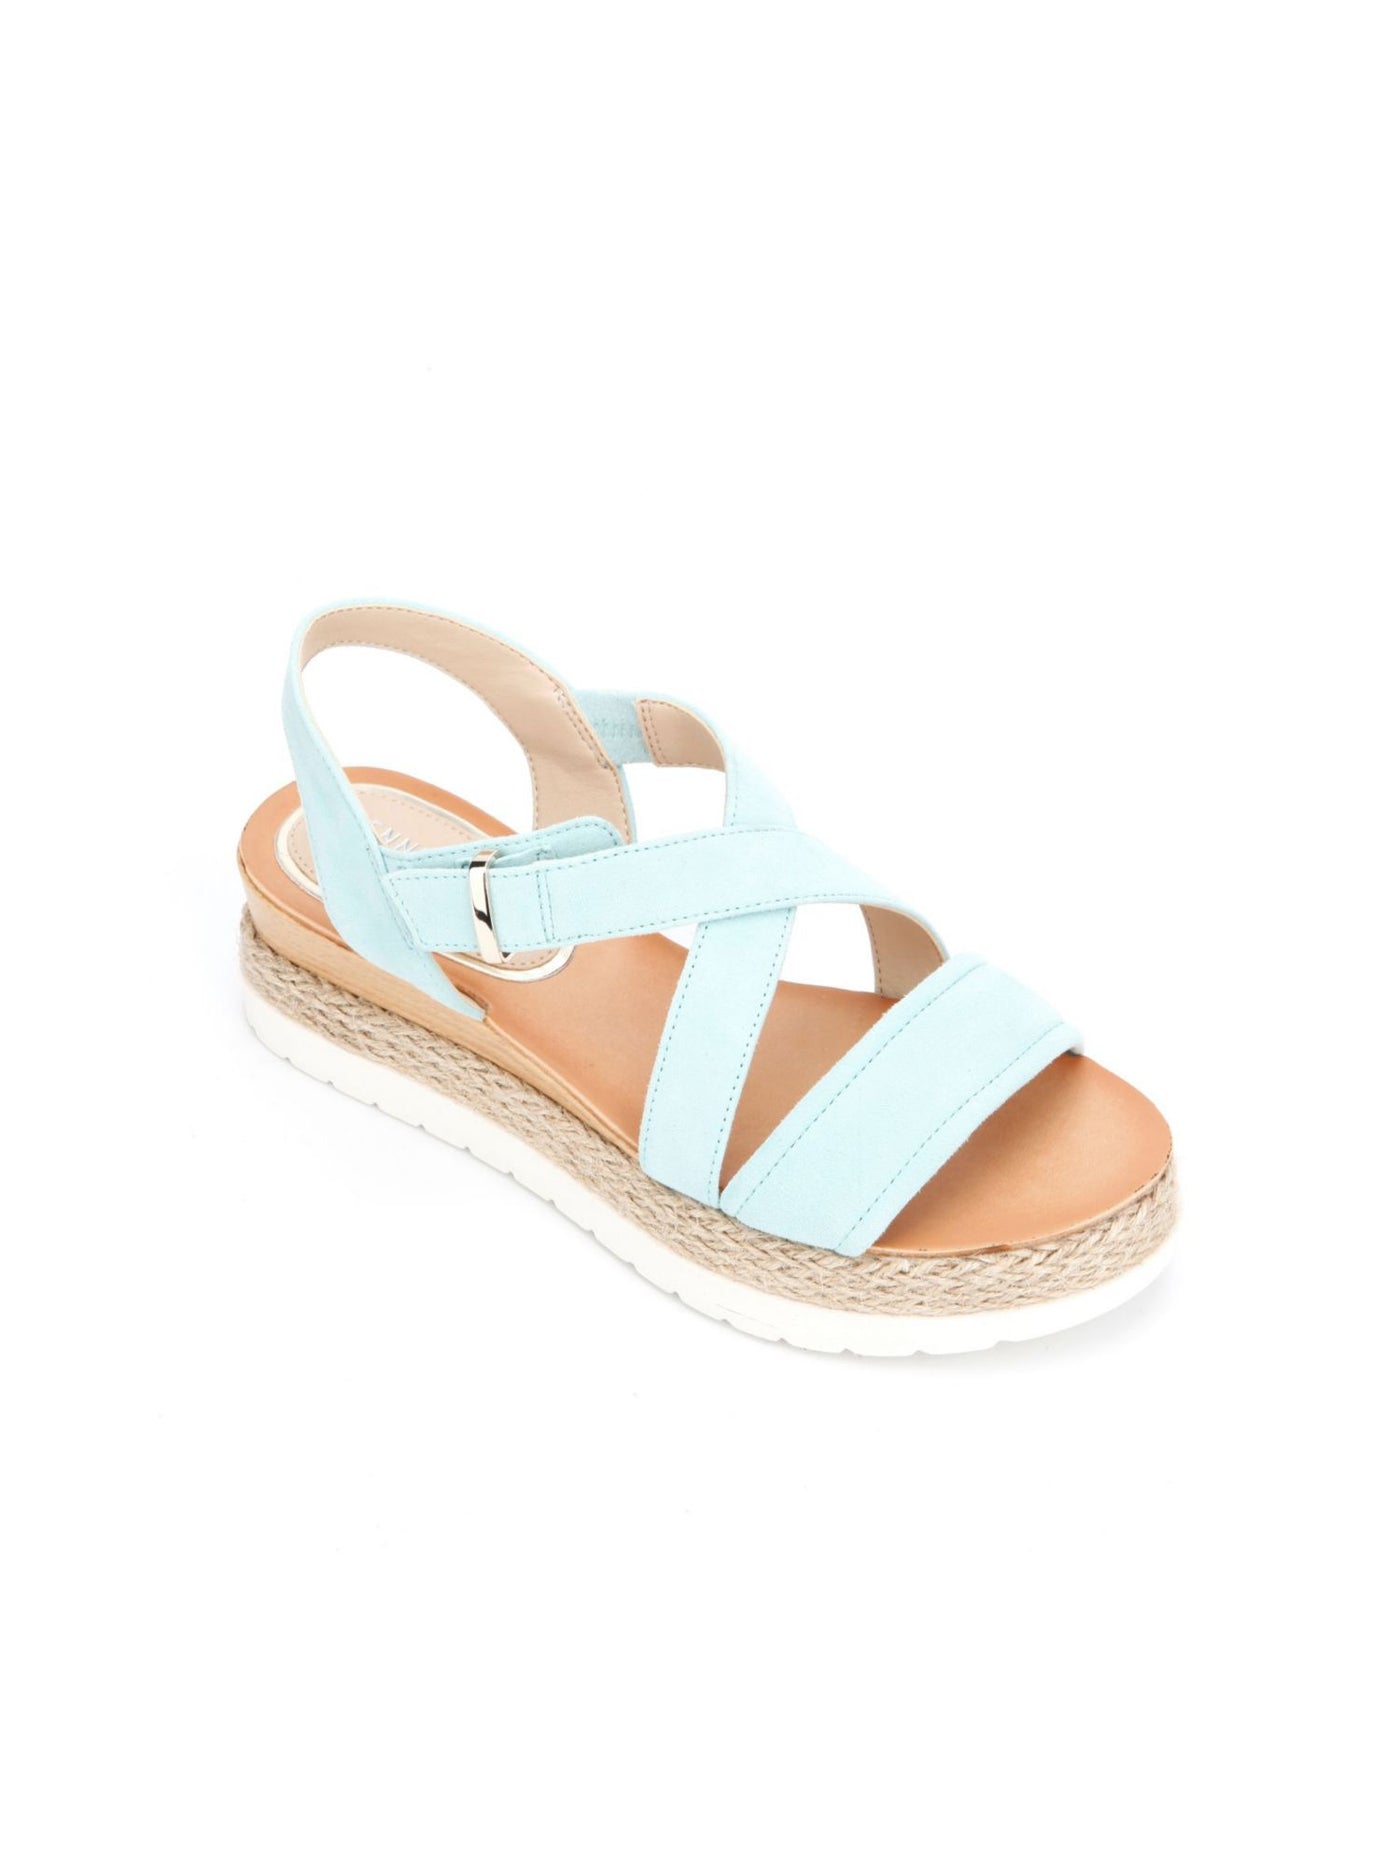 KENNETH COLE NEW YORK Womens Aqua 1 Platform Jute Wrapped Cushioned Jules Round Toe Wedge Buckle Leather Sandals 8.5 M